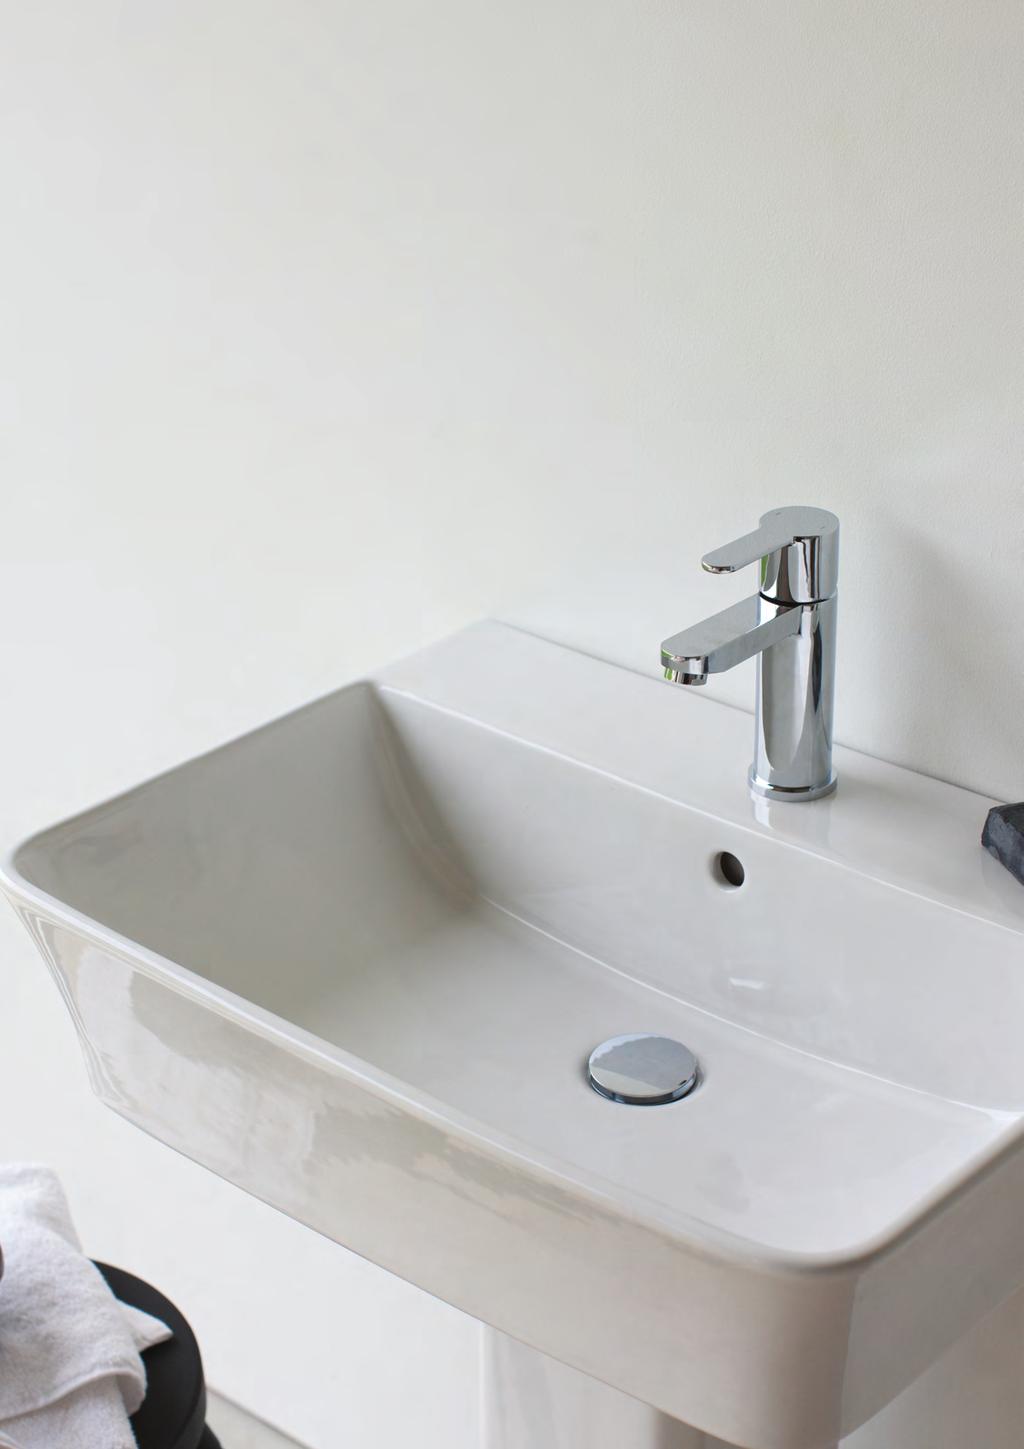 TAPS & ACCESSORIES Each range features extensive options including basin mixers with and without pop-up waste, tall options for vanity basins, mini options for cloakroom uses, bidet mixers, bath